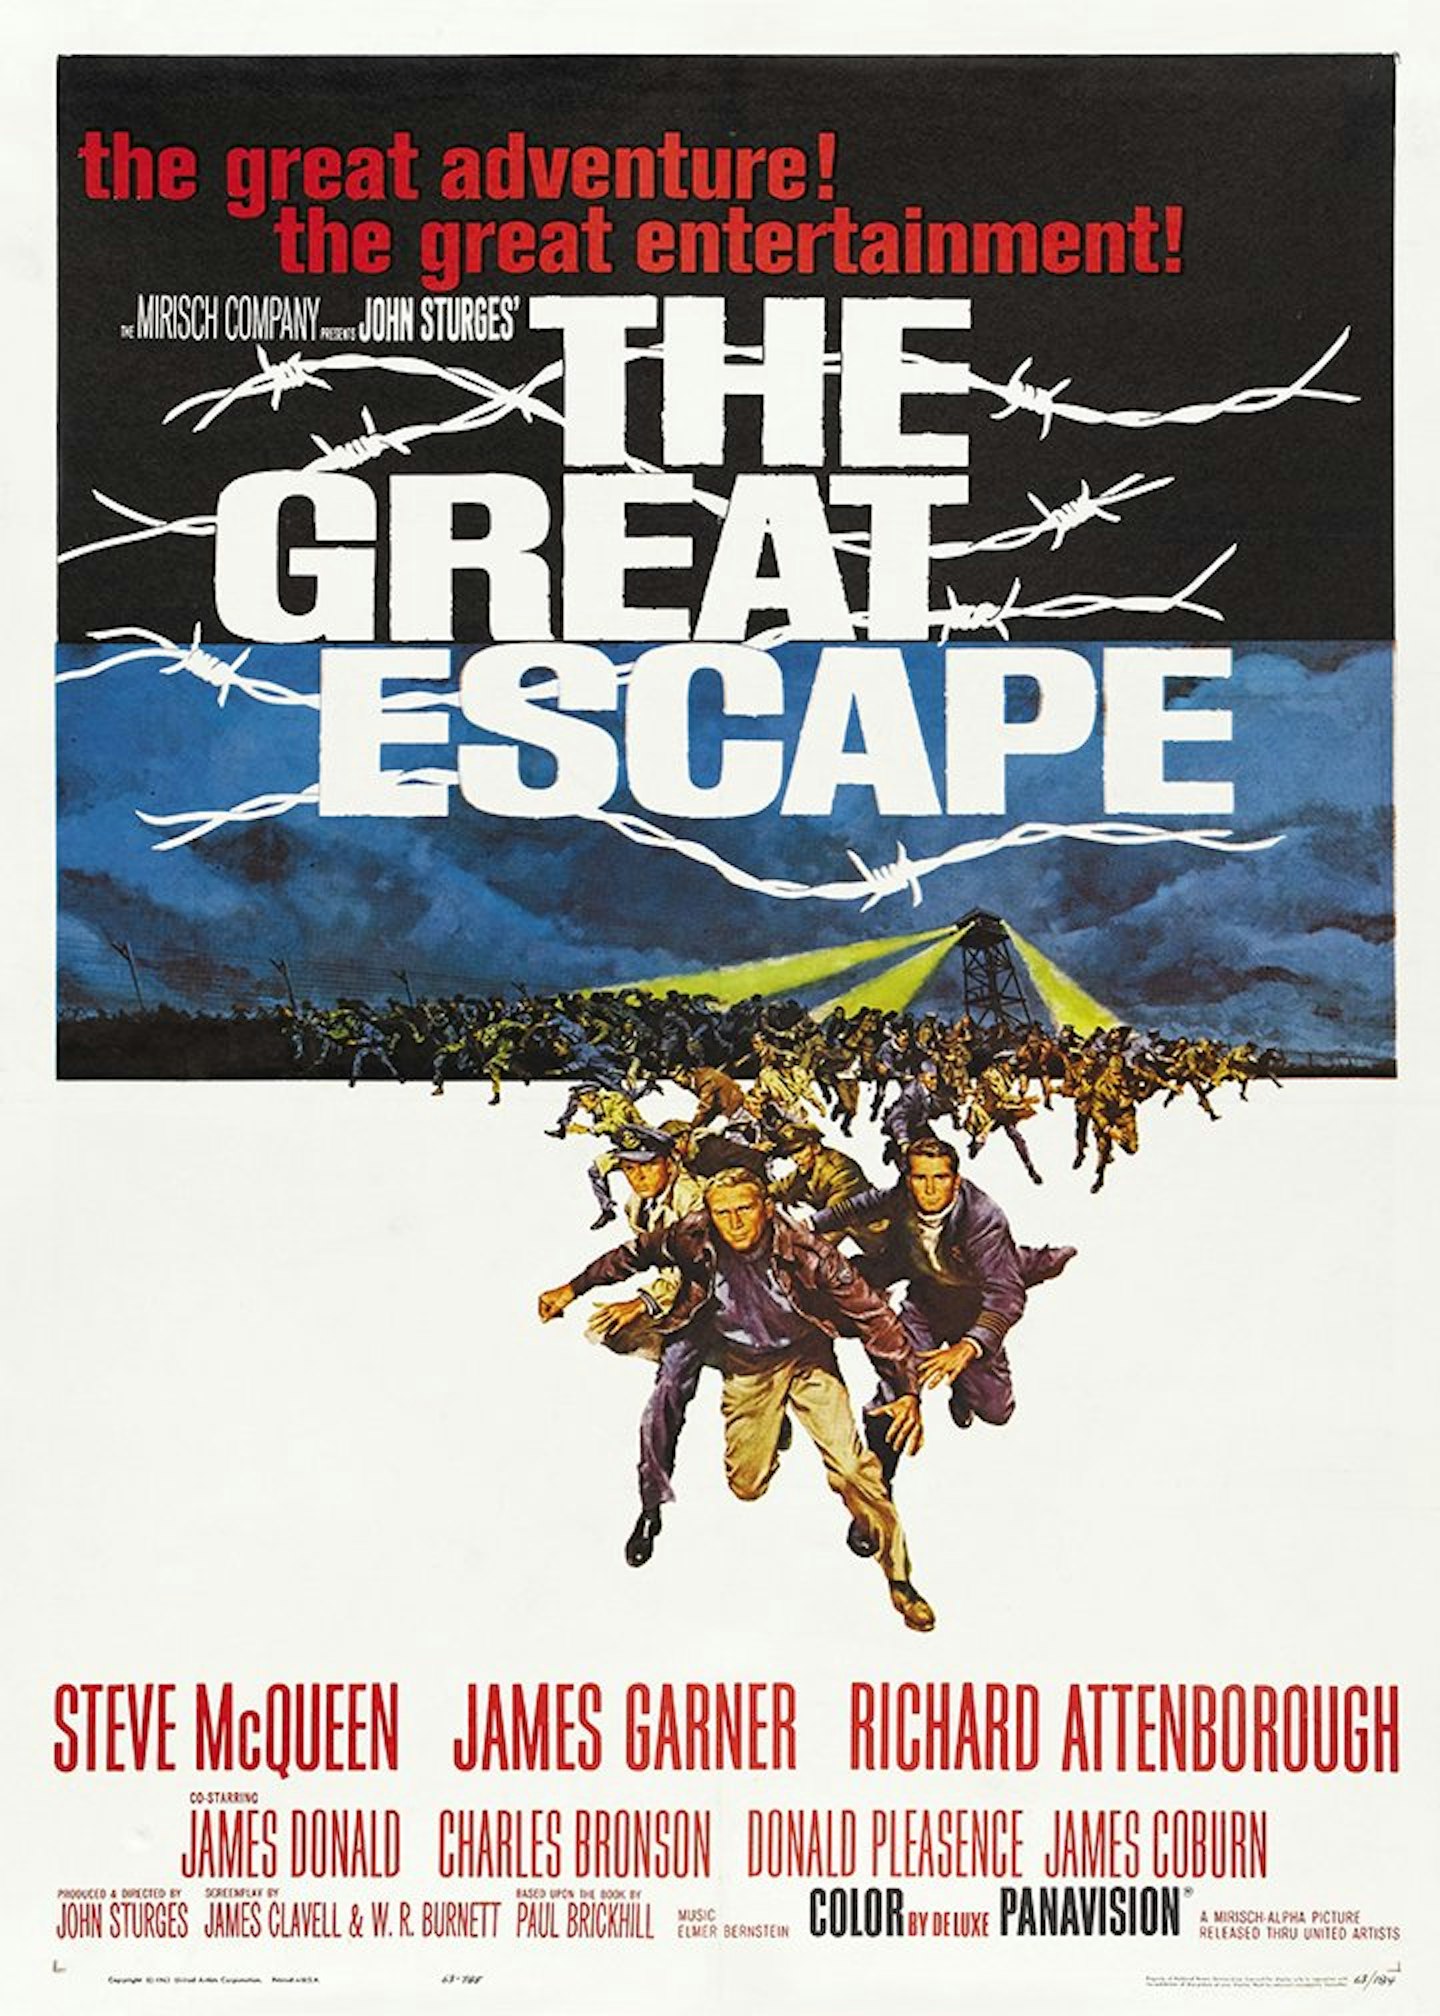 The Great Escape Steve McQueen Classic Movie Film Reproduction A3 Poster, £7.99